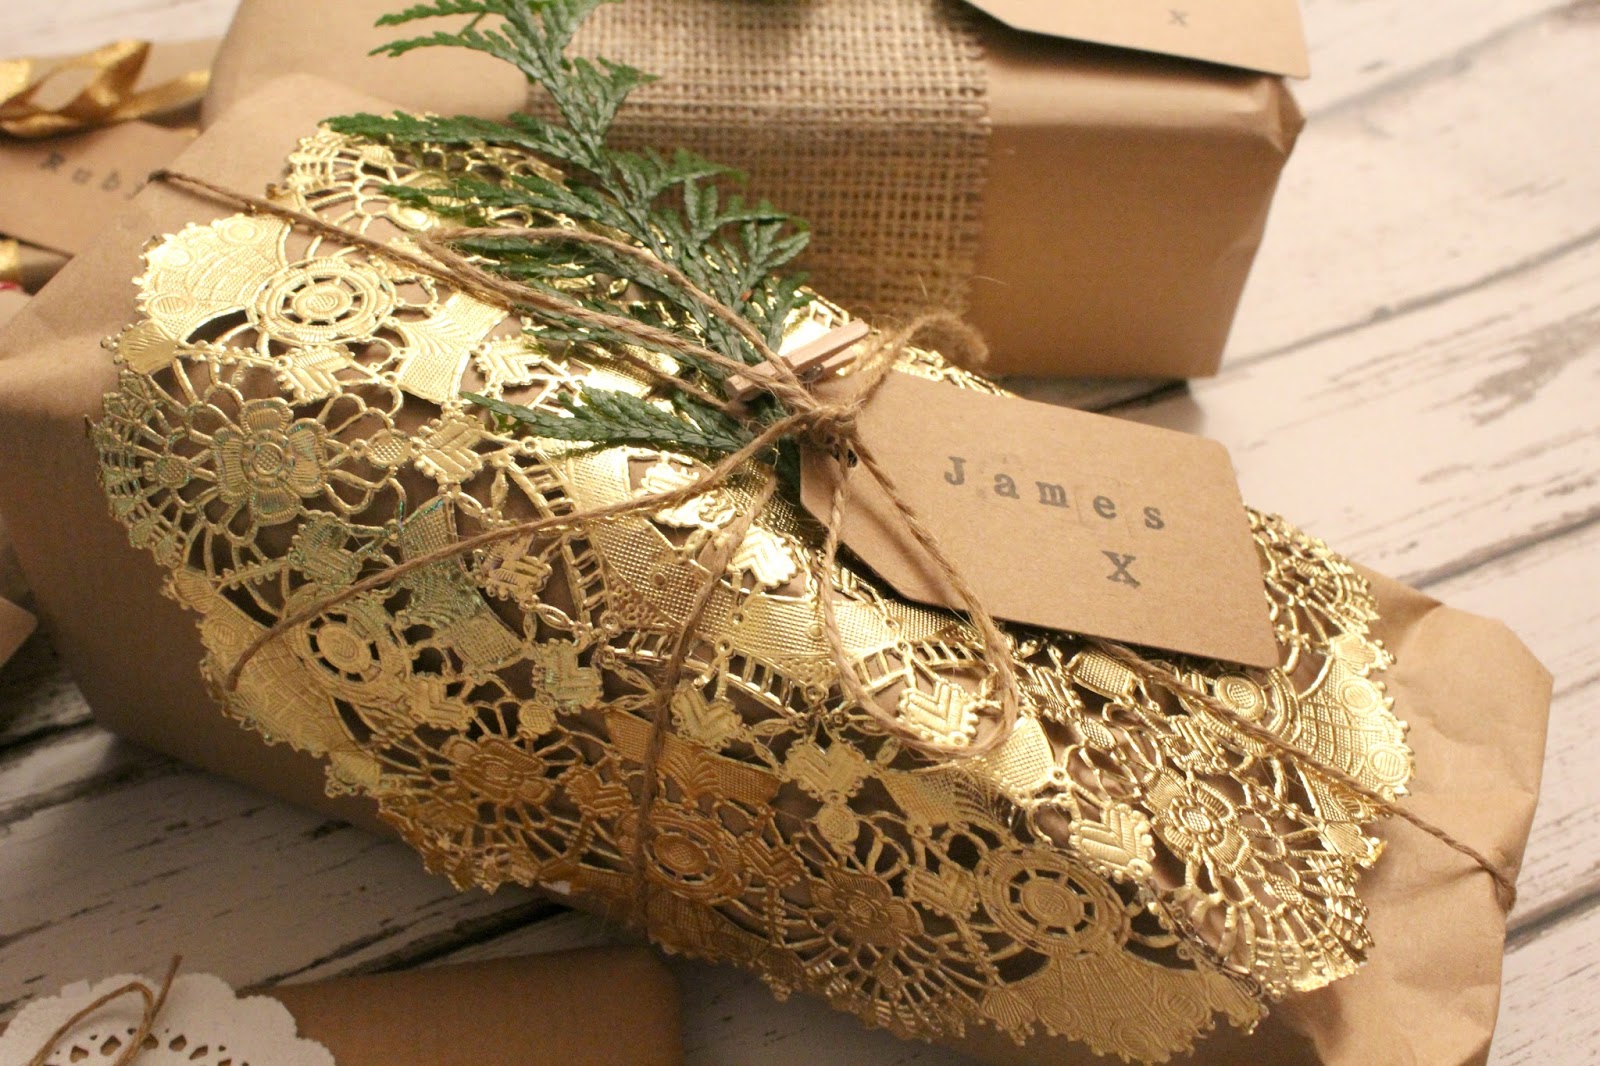 Christmas-gift-wrapping-ideas